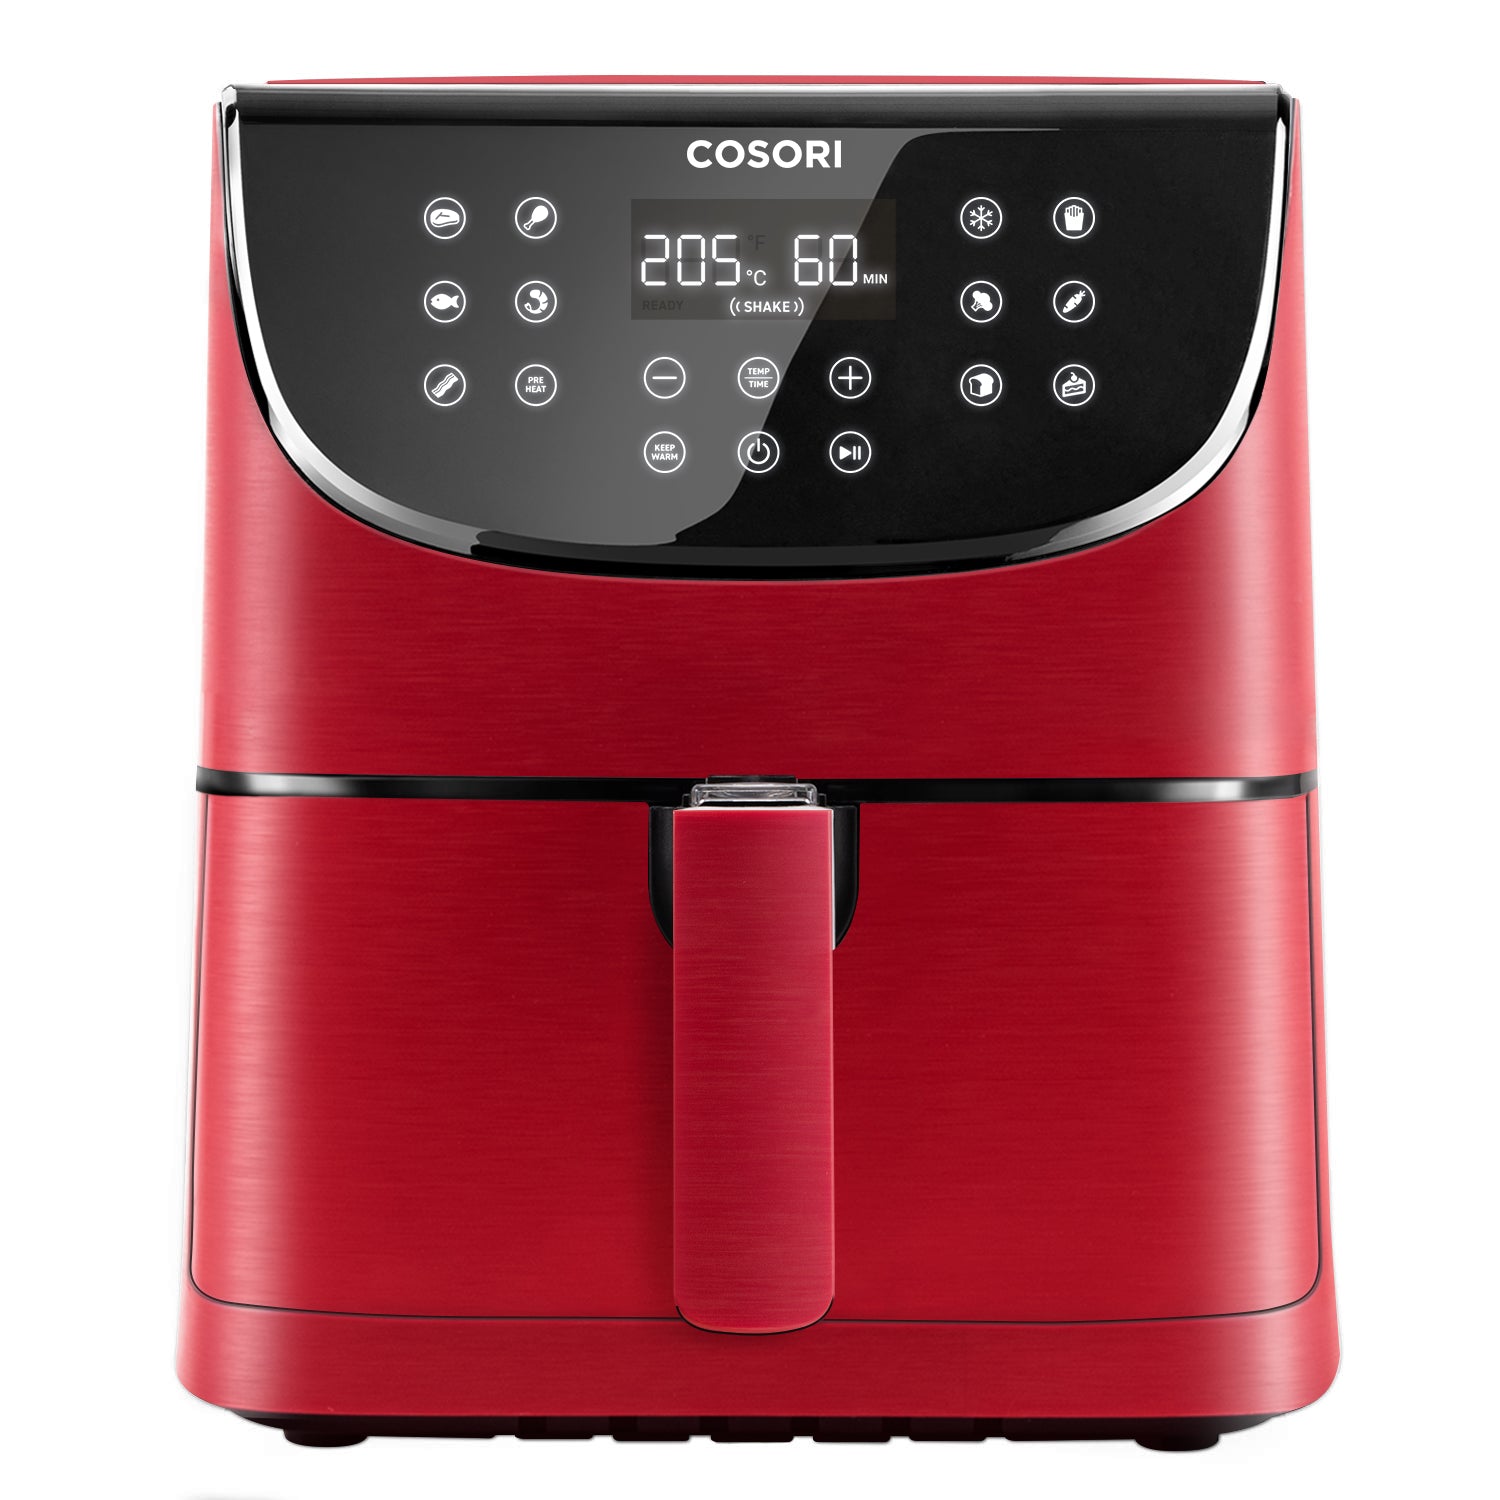 COSORI-Air Fryer-5.5L-13 Functions-CP158